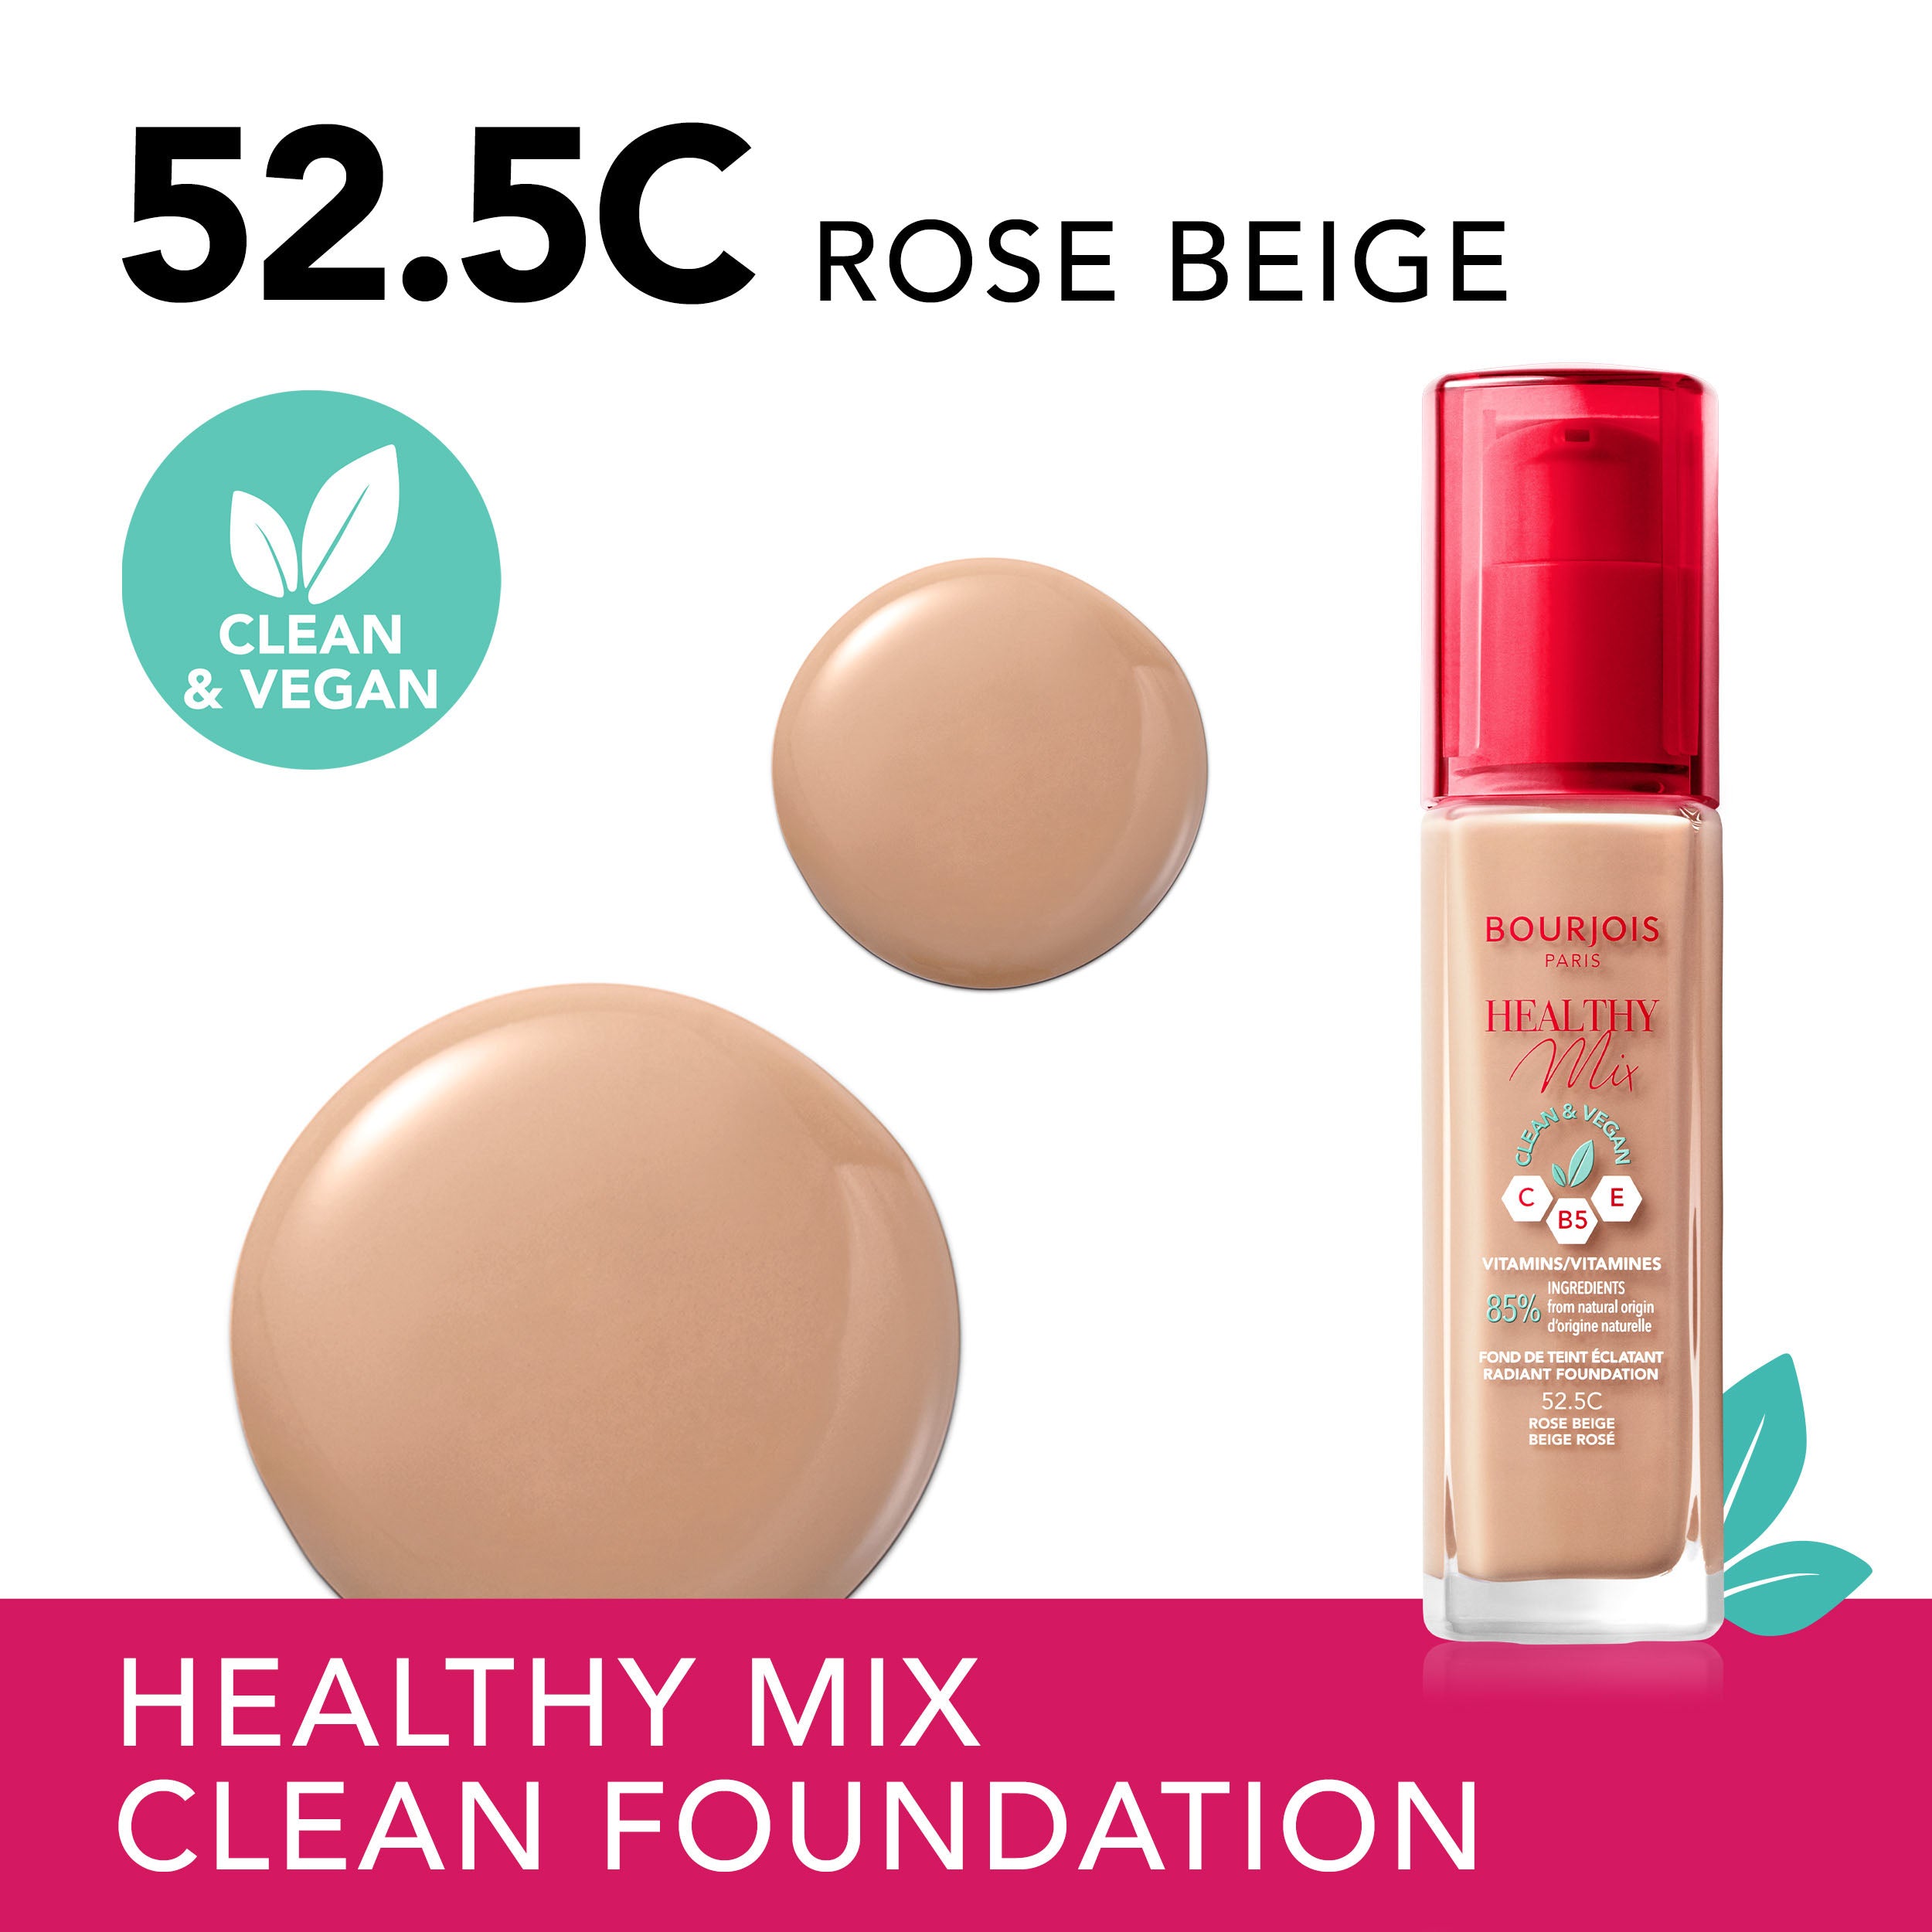 Healty mix clean foundation. 52.5C